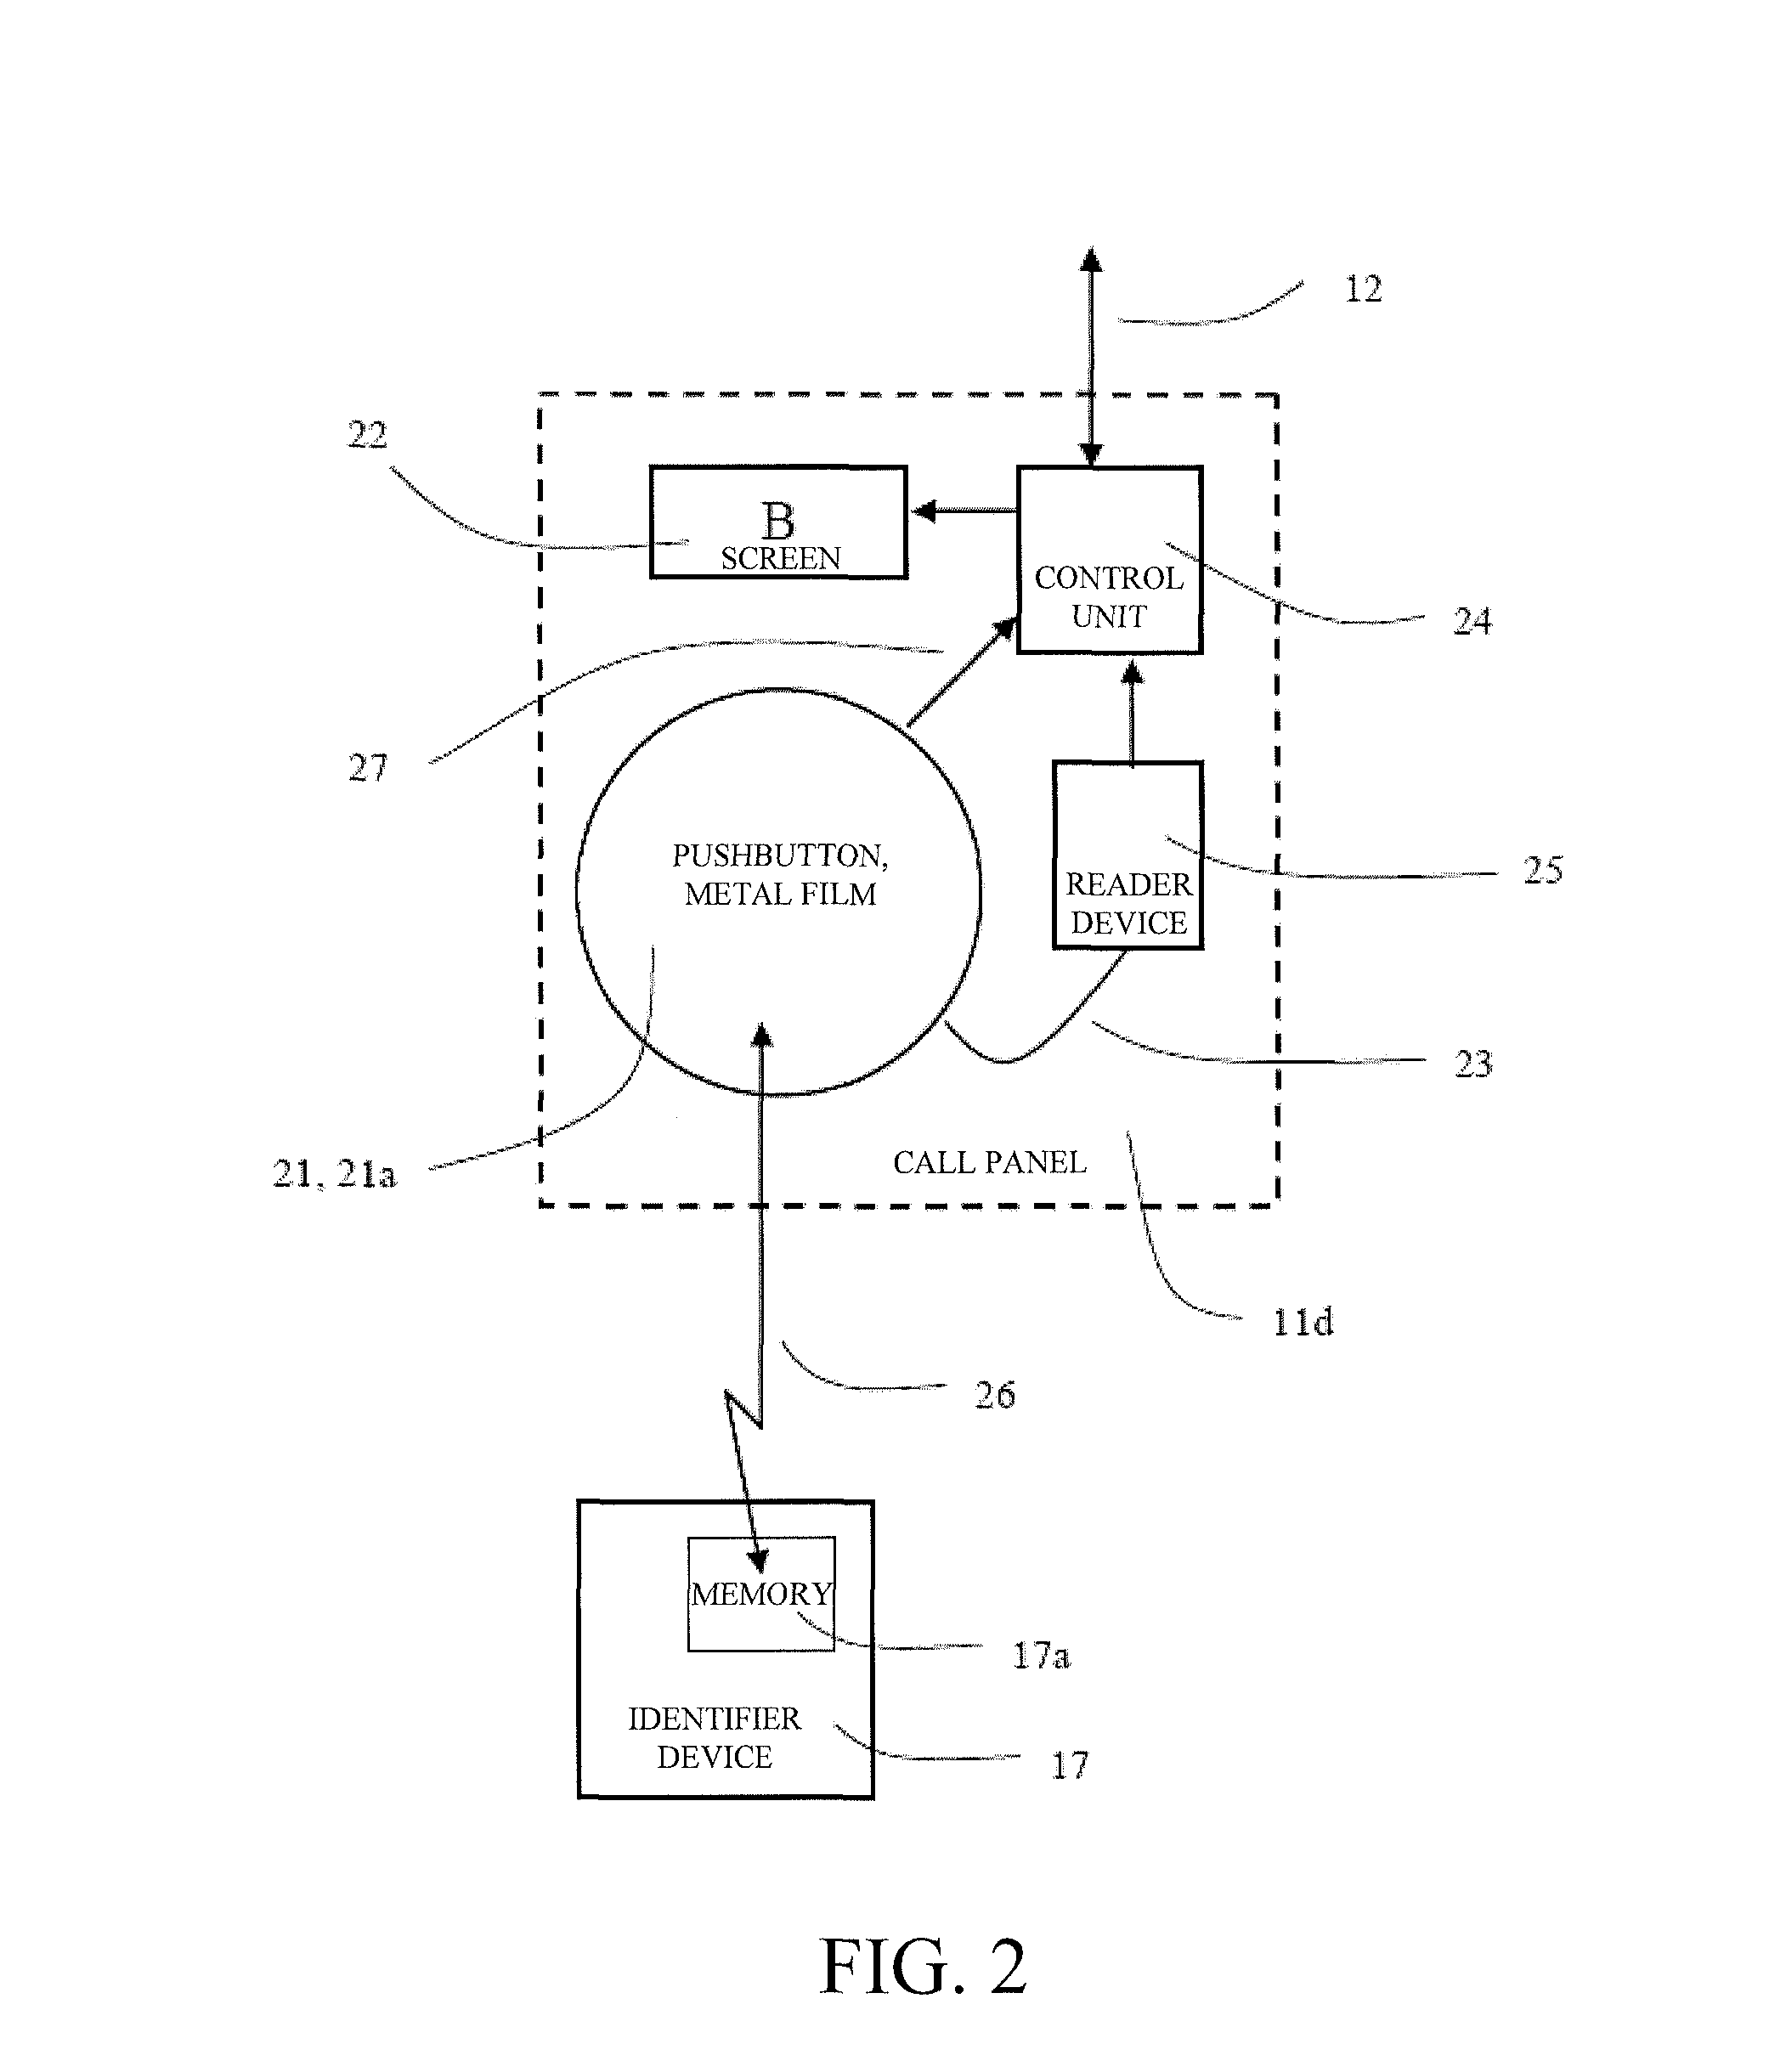 Methods and systems for providing service requests to conveyance systems